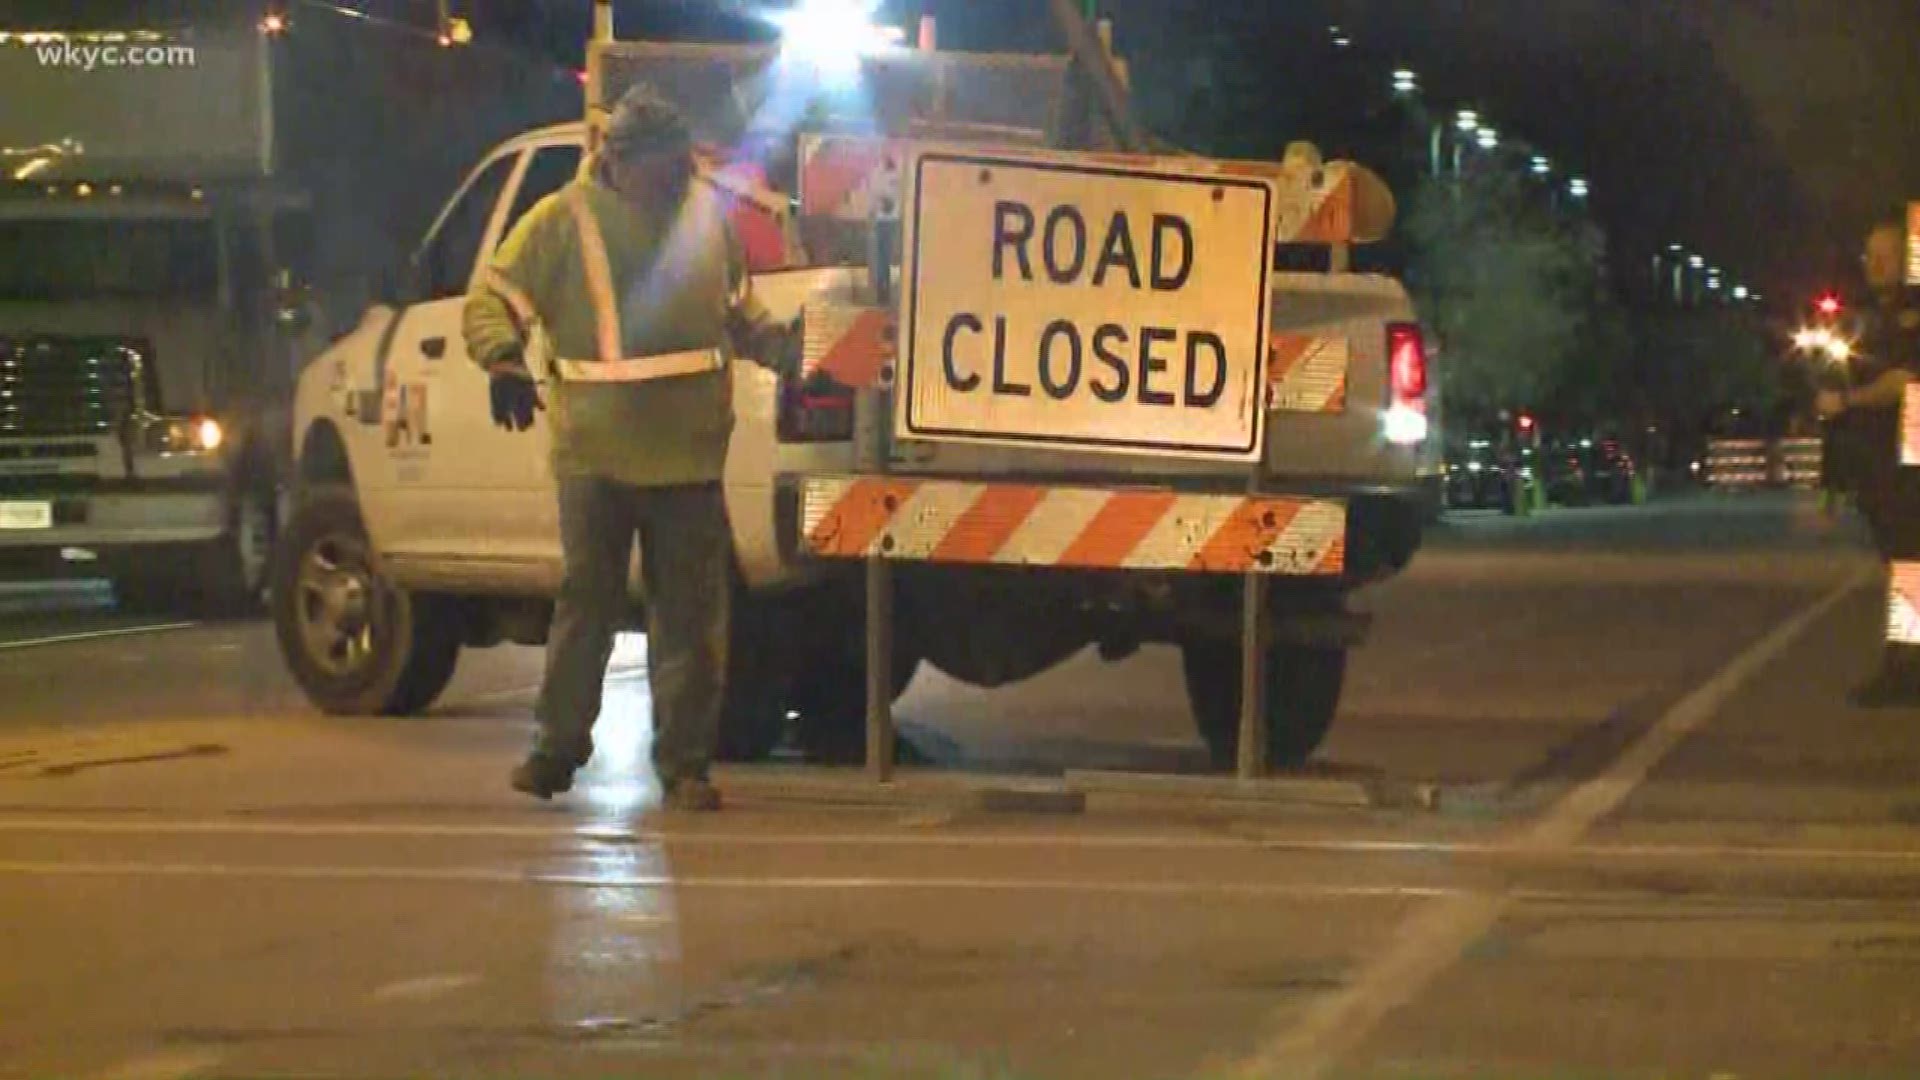 Nov. 4, 2019: As two movies begin production in Cleveland, the city has announced a few road closures. Here's how this will impact Cleveland traffic.